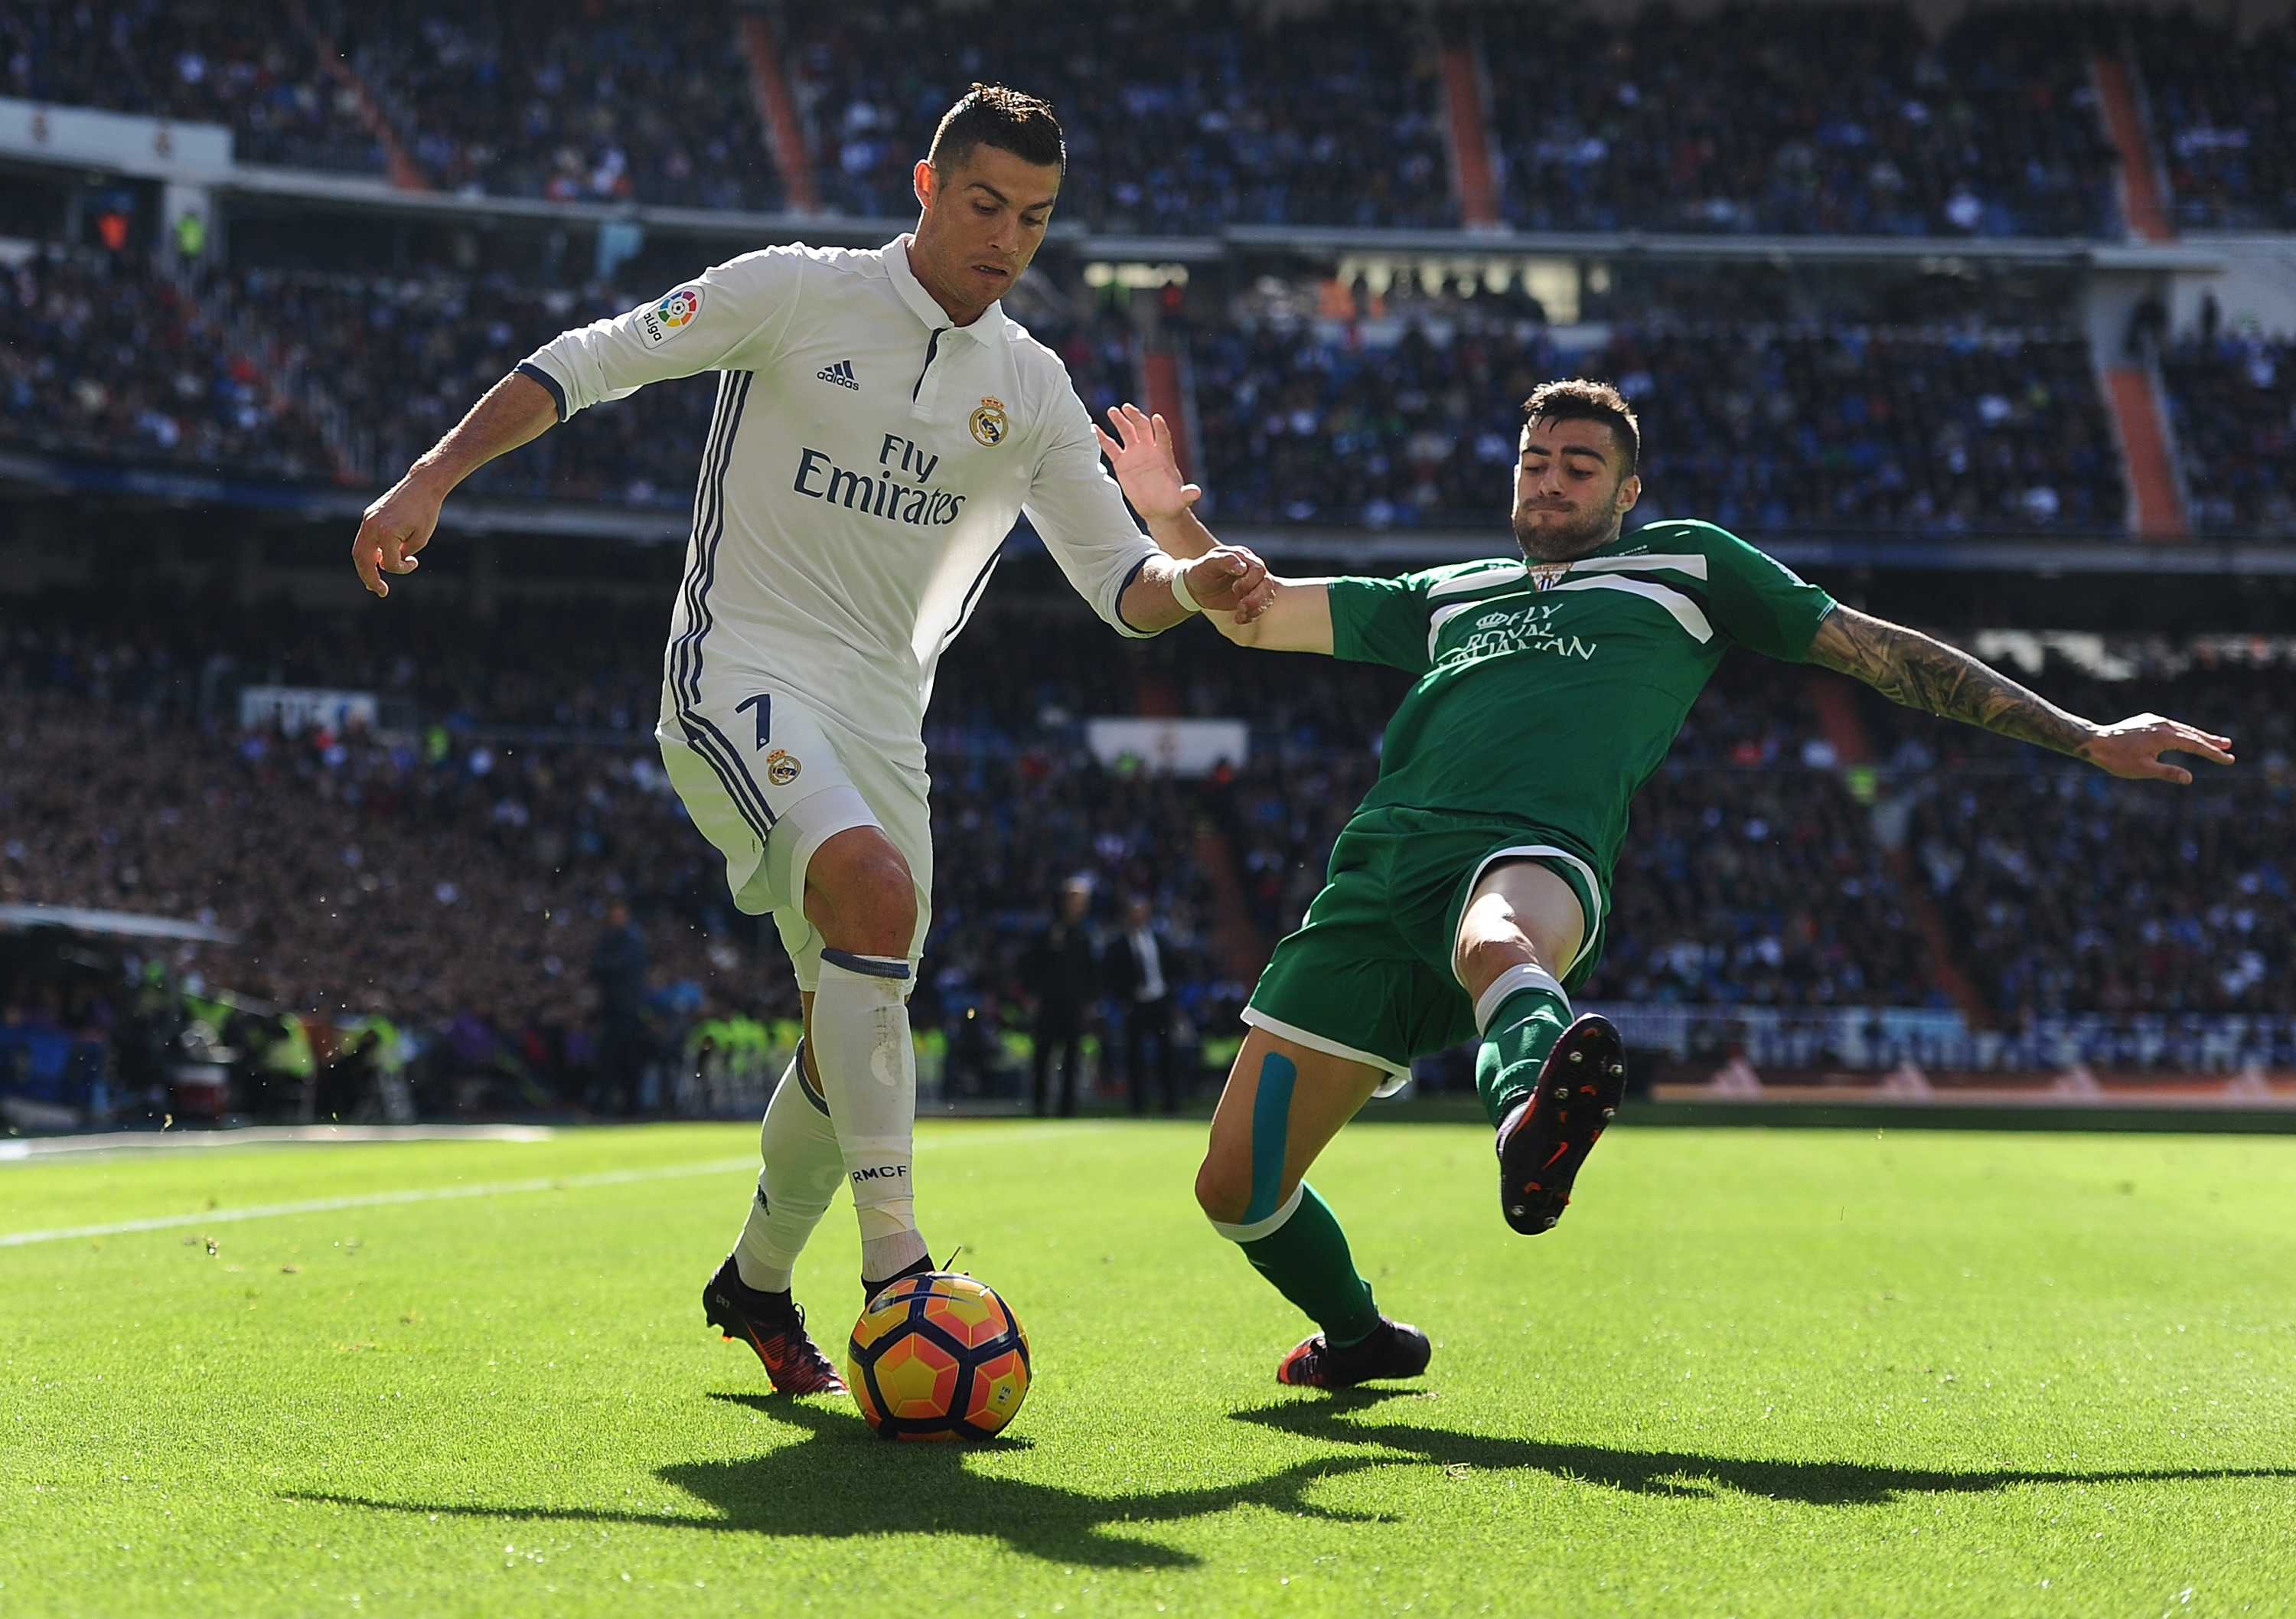 MADRID, SPAIN - NOVEMBER 06:  Cristiano Ronaldo of Real Madrid is tackled by Diego Rico of CD Leganes controls the ball while being challenged by during the Liga match between Real Madrid CF and Leganes on November 6, 2016 in Madrid, Spain.  (Photo by Denis Doyle/Getty Images)